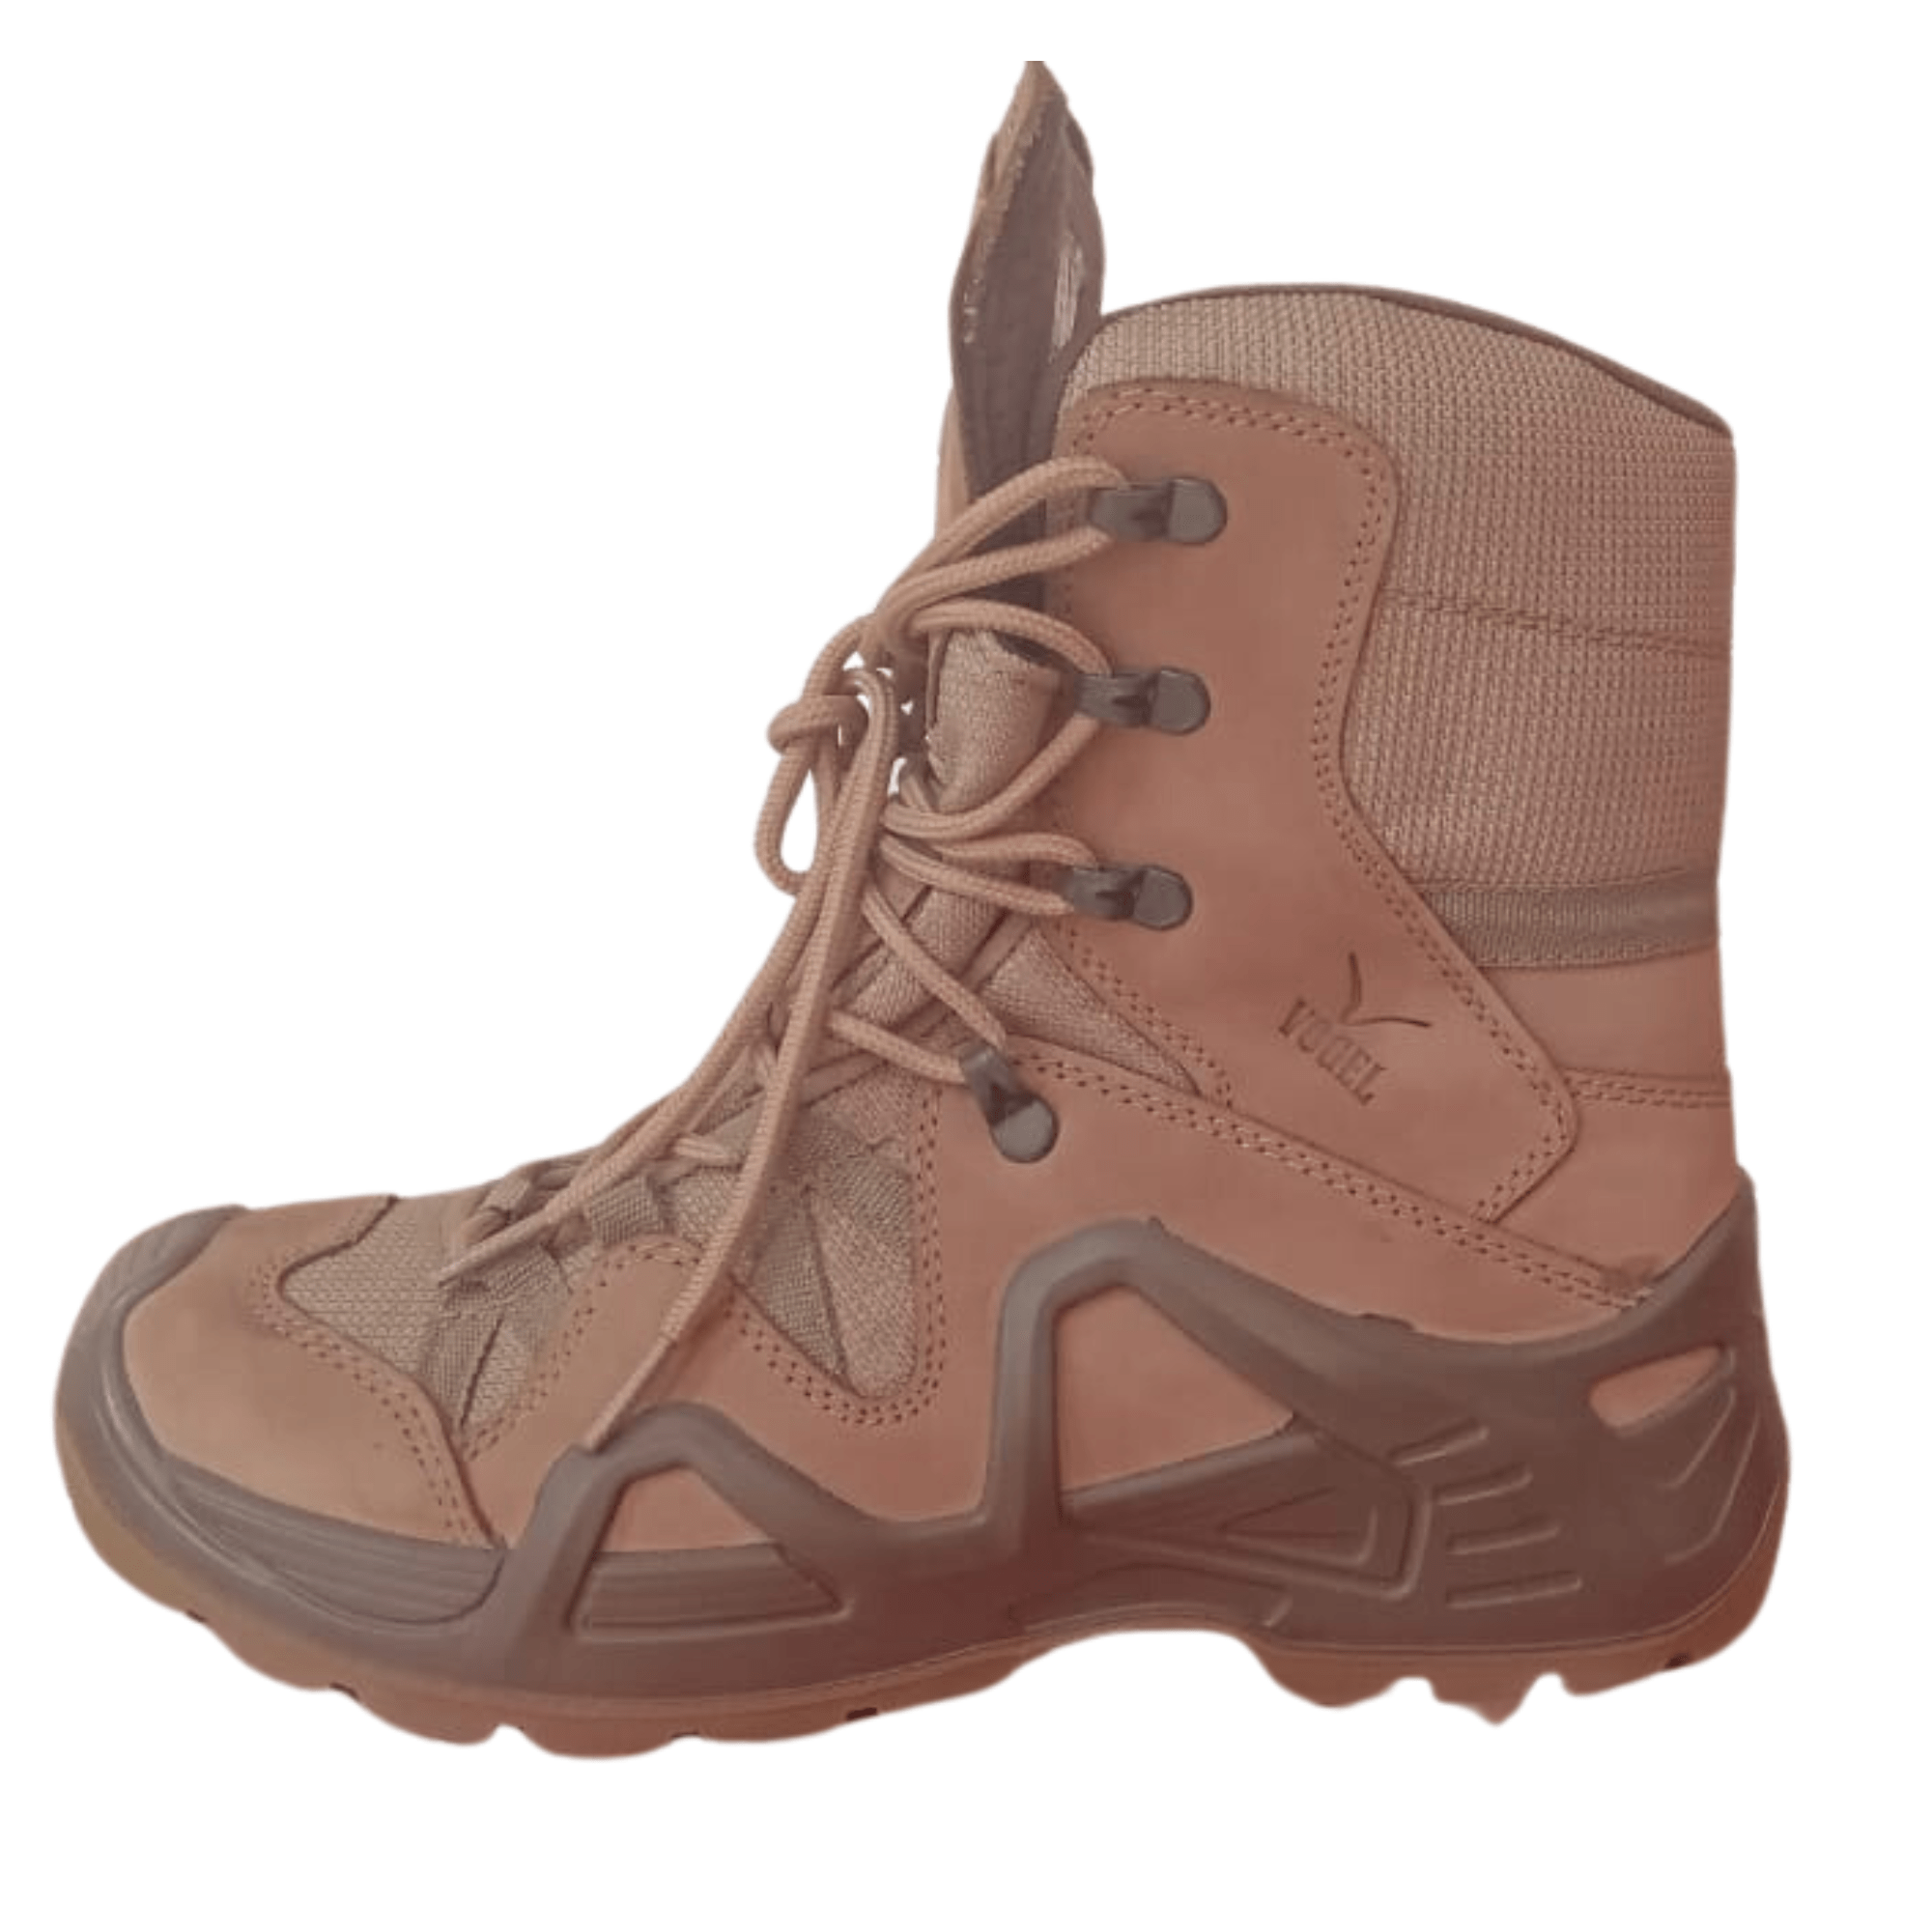 The Vogel High Cut Tactical Boot is a top-quality and versatile footwear option for tactical professionals. Available at Supply Master Ghana, Accra, these boots are designed to provide durability, comfort, and excellent performance in demanding environments. Boots & Footwear Buy Tools hardware Building materials